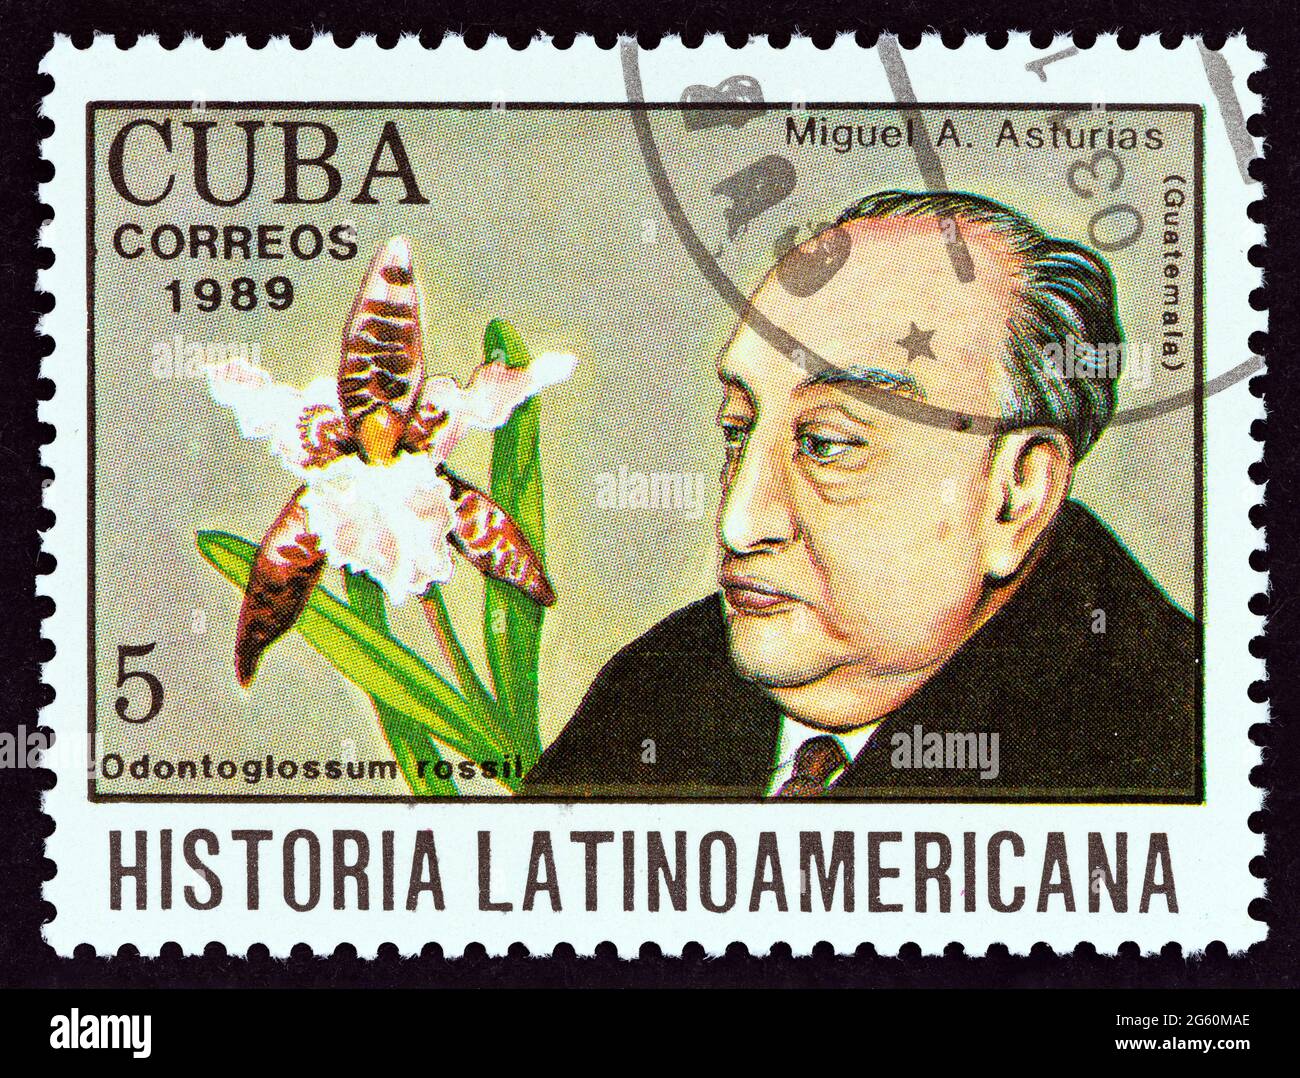 CUBA - CIRCA 1989: A stamp printed in Cuba from the 'Latin American History' issue shows Miguel Asturias and Odontoglossum rossii (Guatemala). Stock Photo